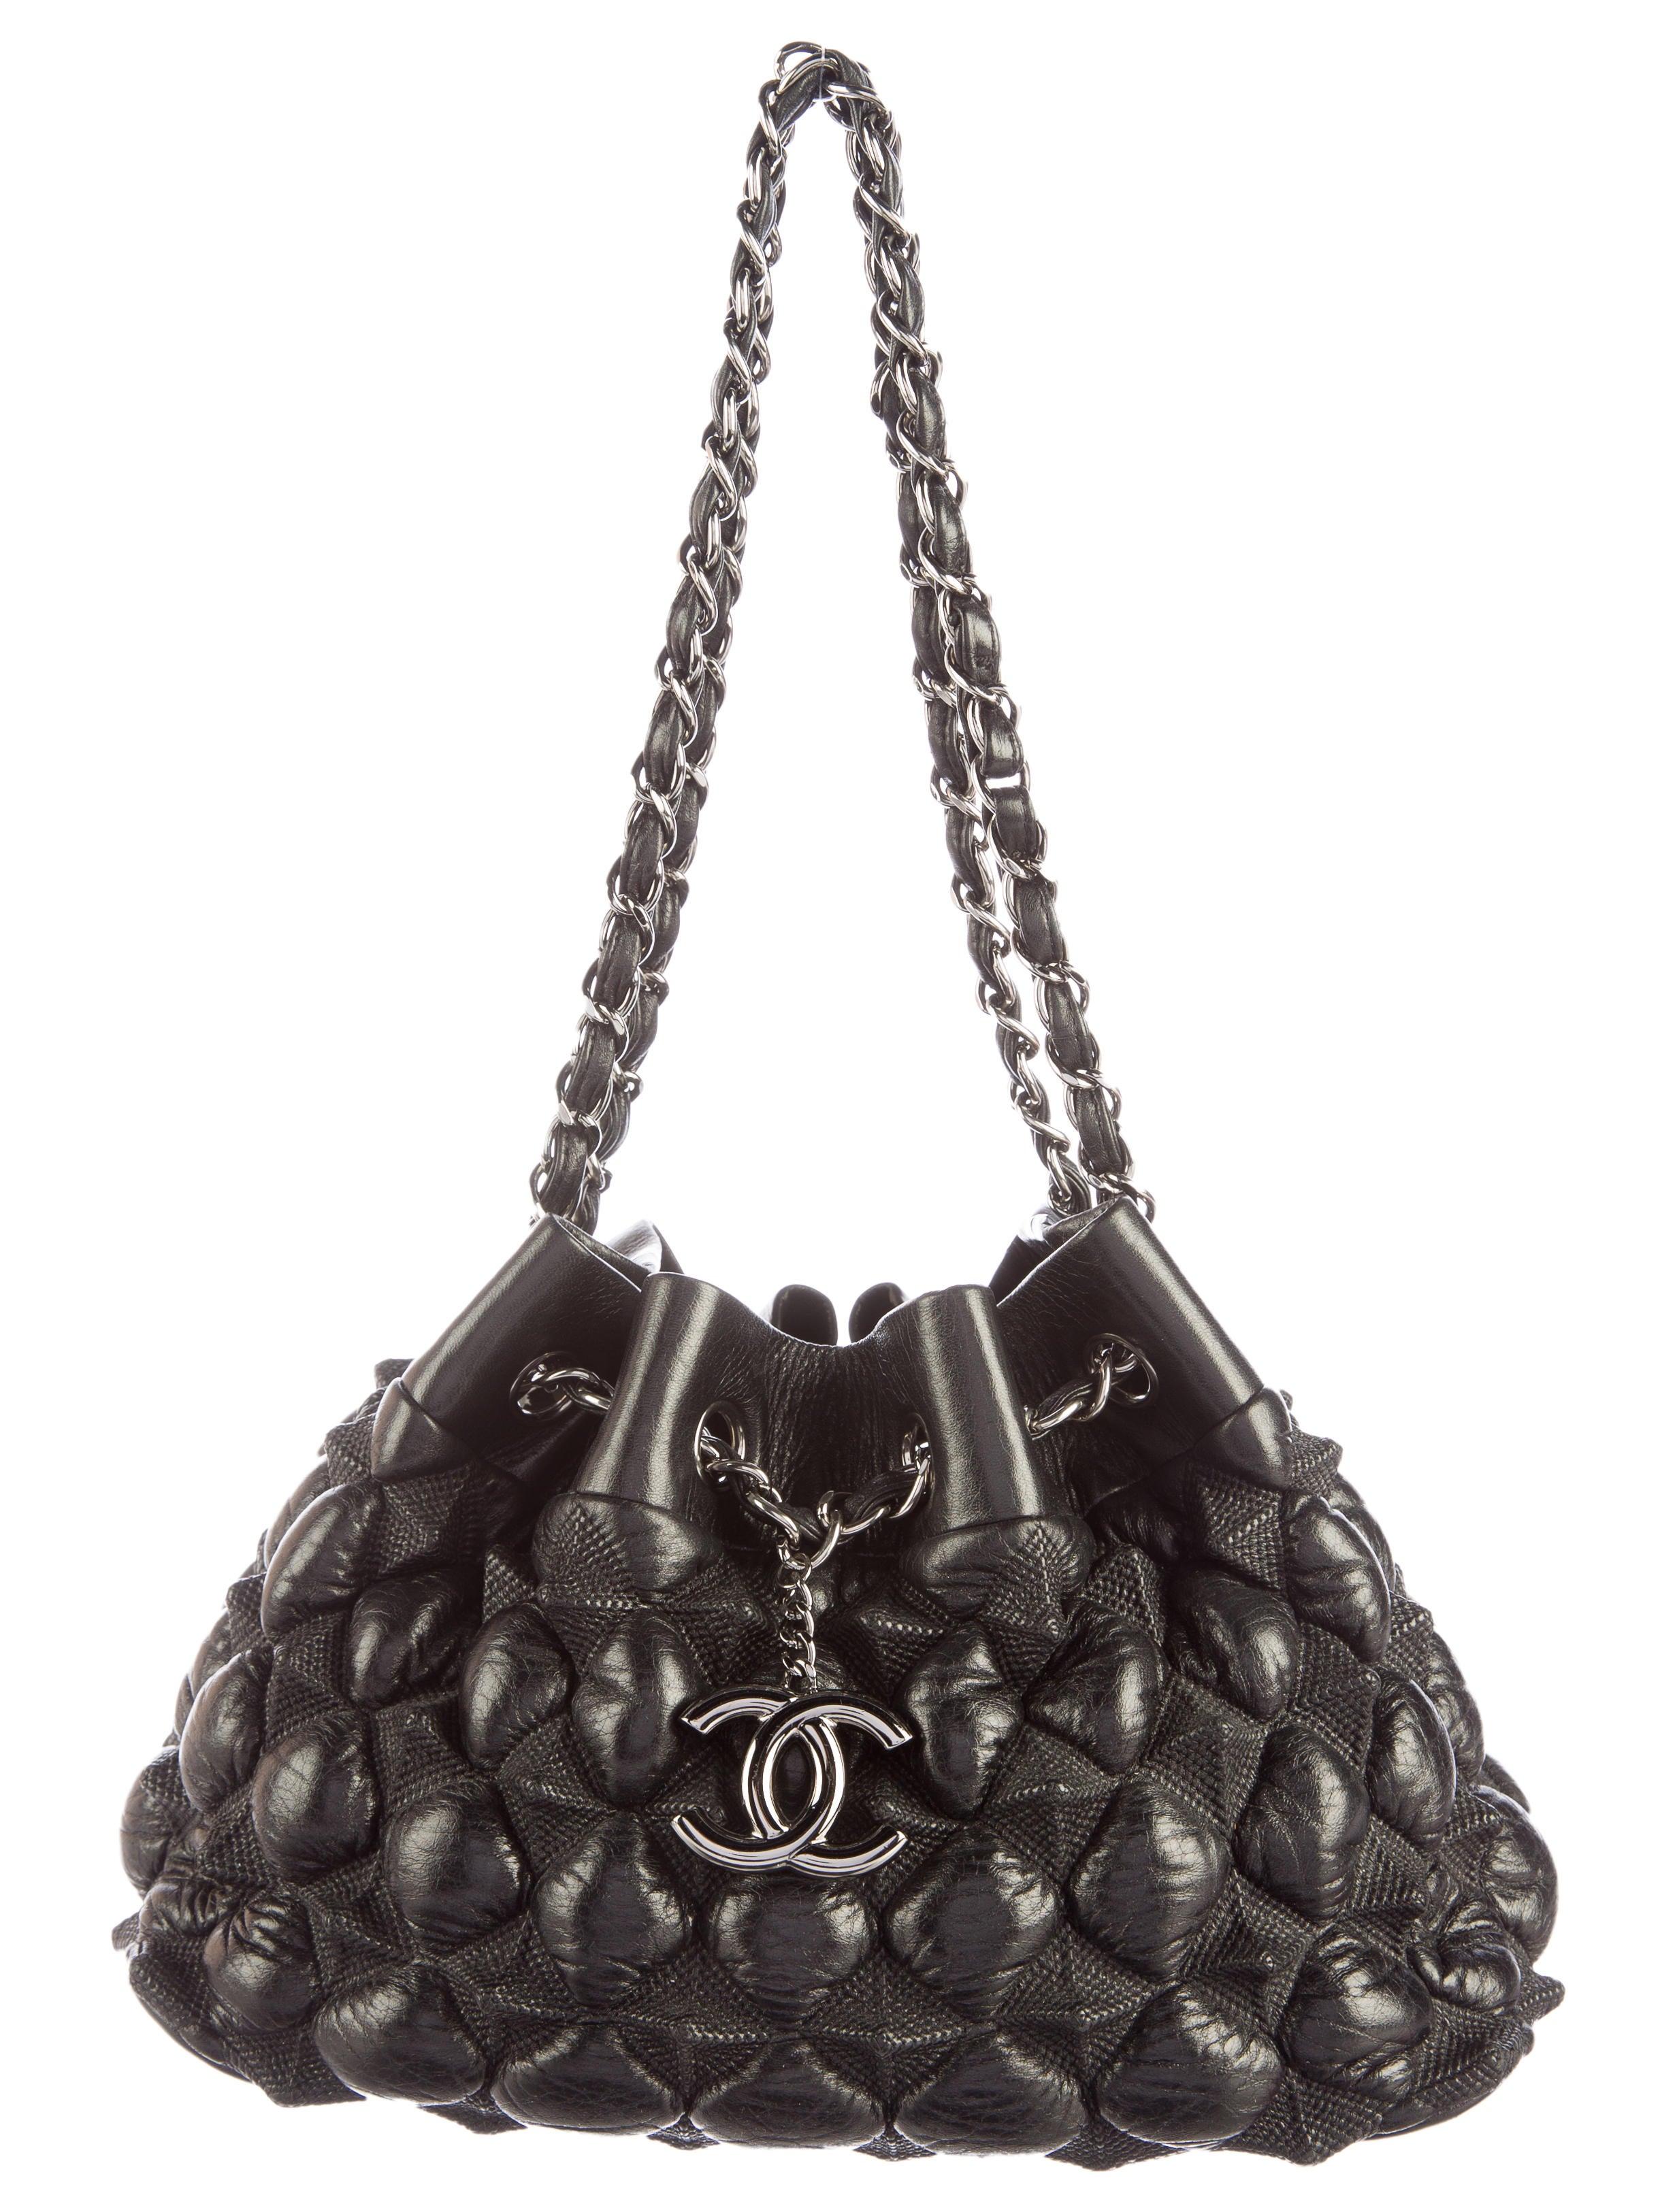 Black Chanel Rare Metiers d'Art Raised Geometric Pyramid Diamond Quilted Shoulder Bag For Sale